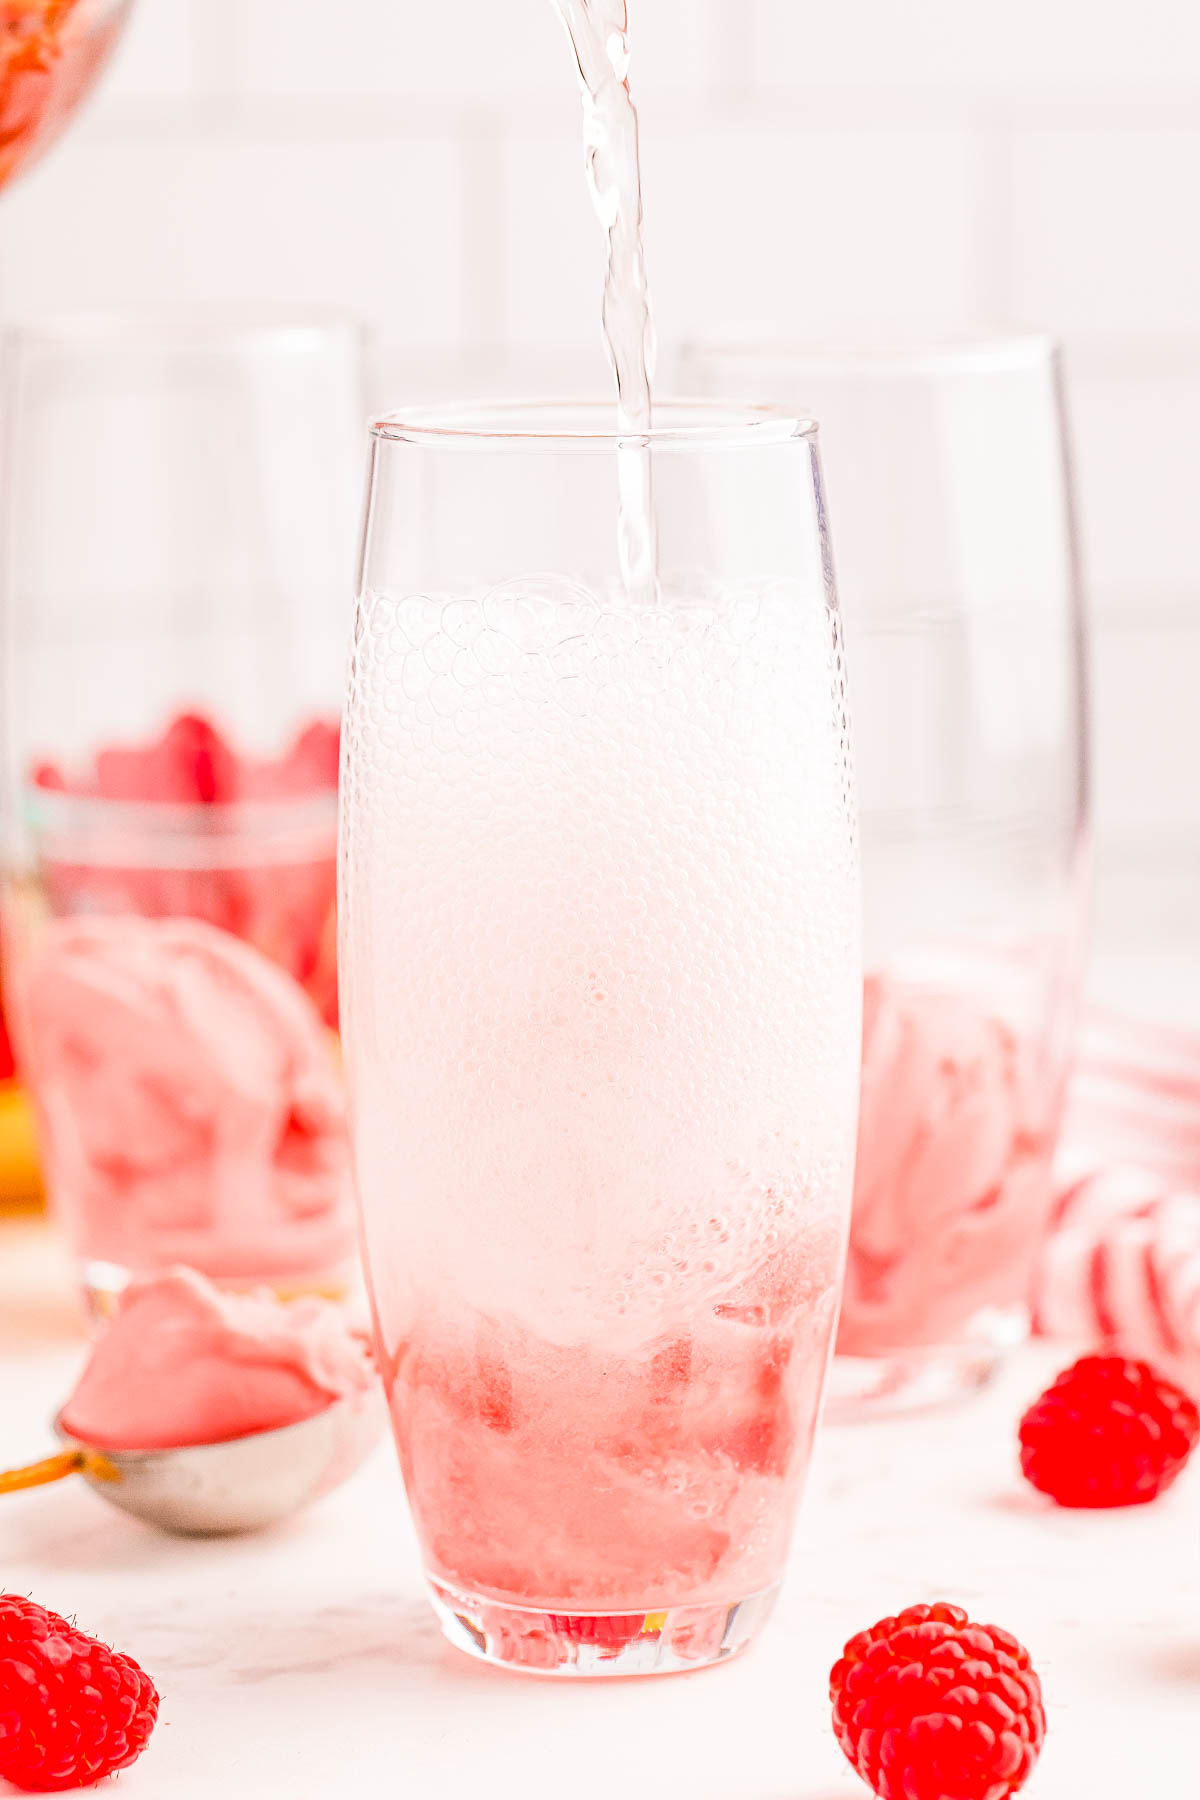 A clear glass being filled with a pink foamy liquid, likely raspberry-flavored, with fresh raspberries and scoops of pink ice cream visible at the bottom.